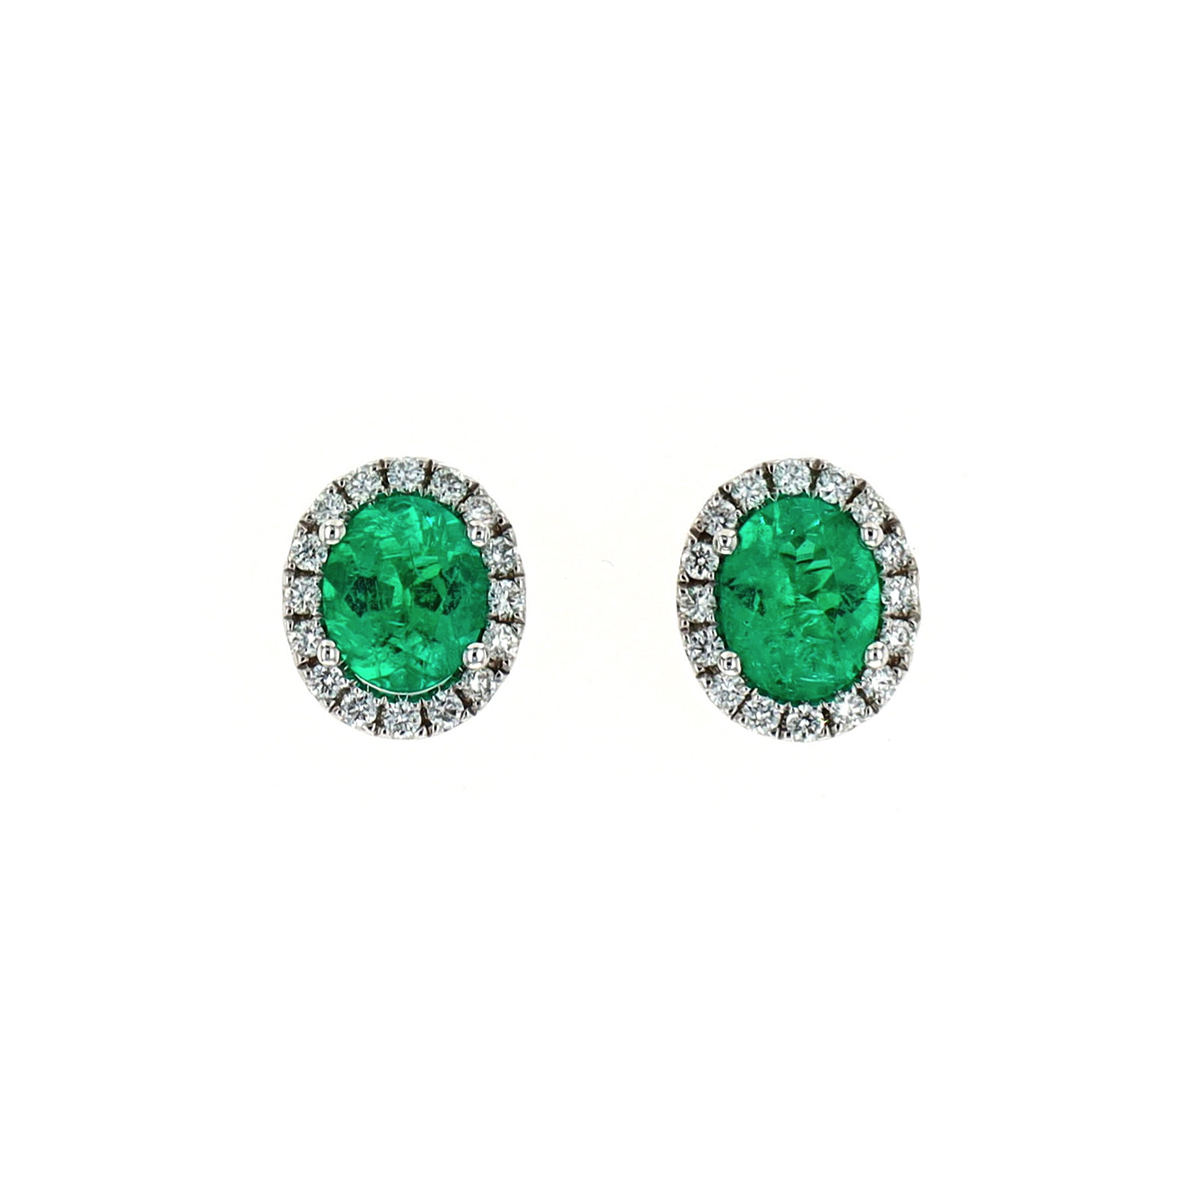 18K White Gold Oval Emerald and Diamond Halo Earrings